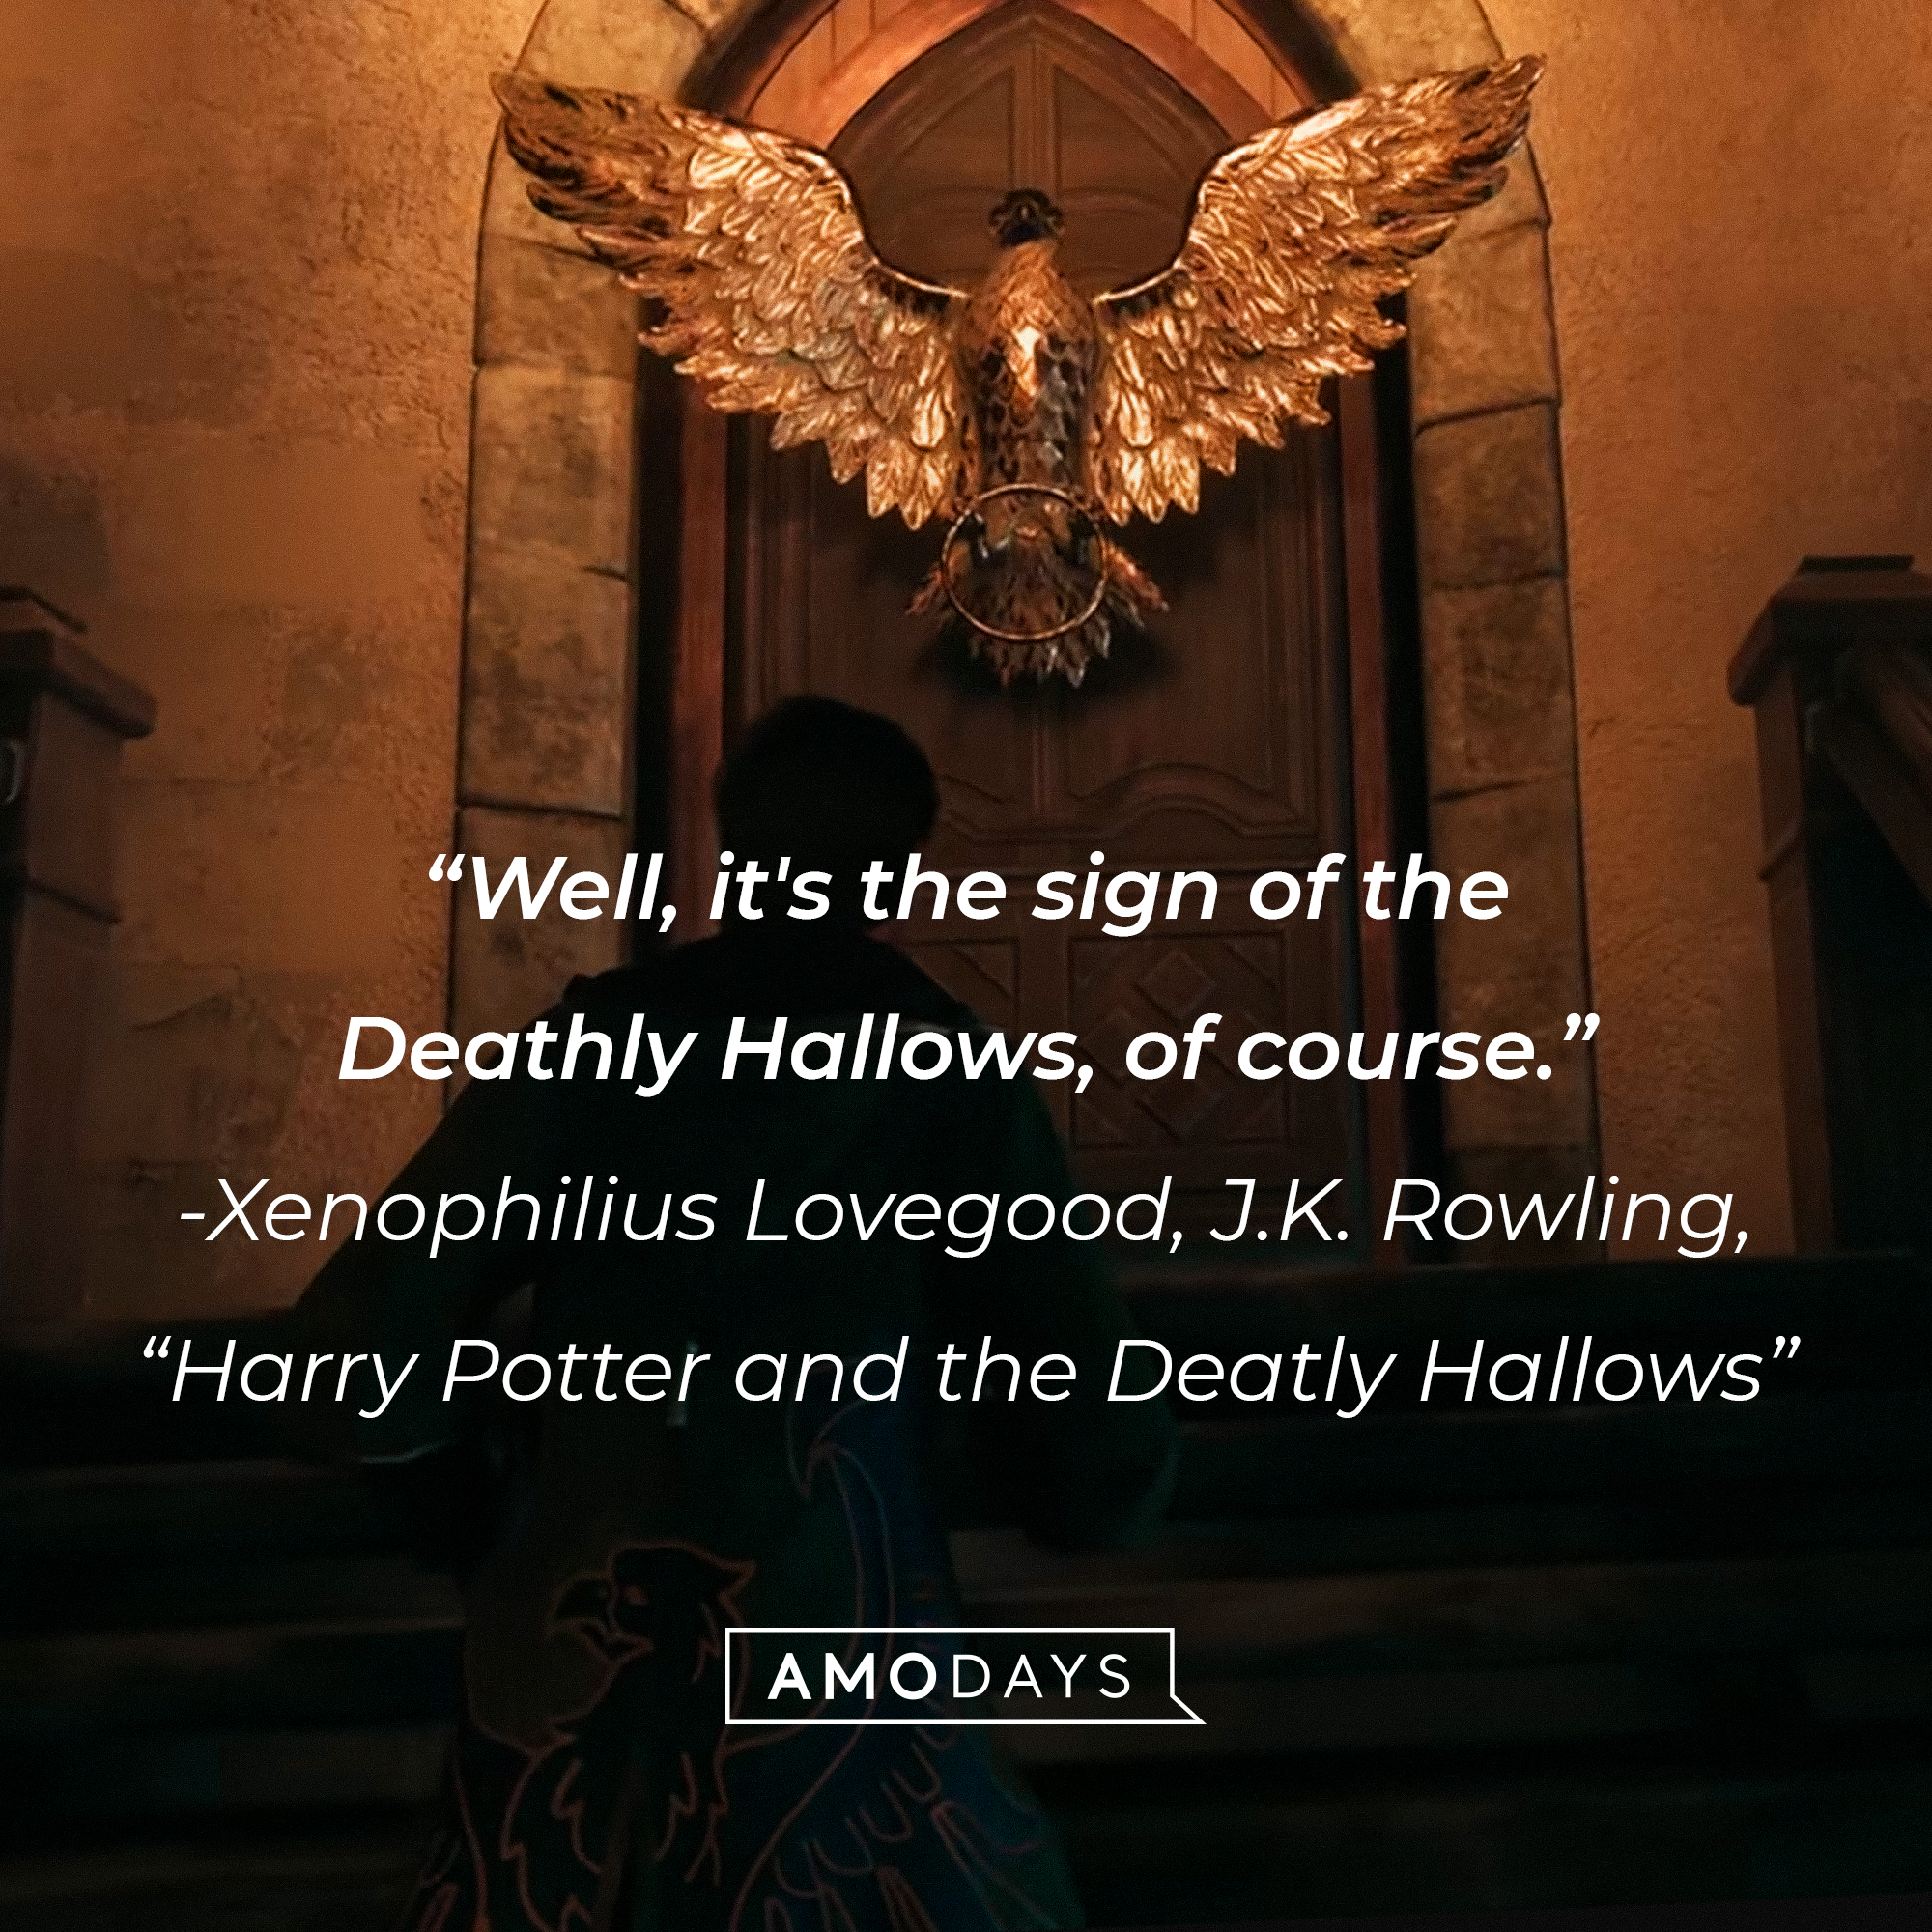 Xenophilius Lovegood’s quote from J.K. Rowling’s “Harry Potter and the Deathly Hallows” | Source: youtube.com/WizardingWorld